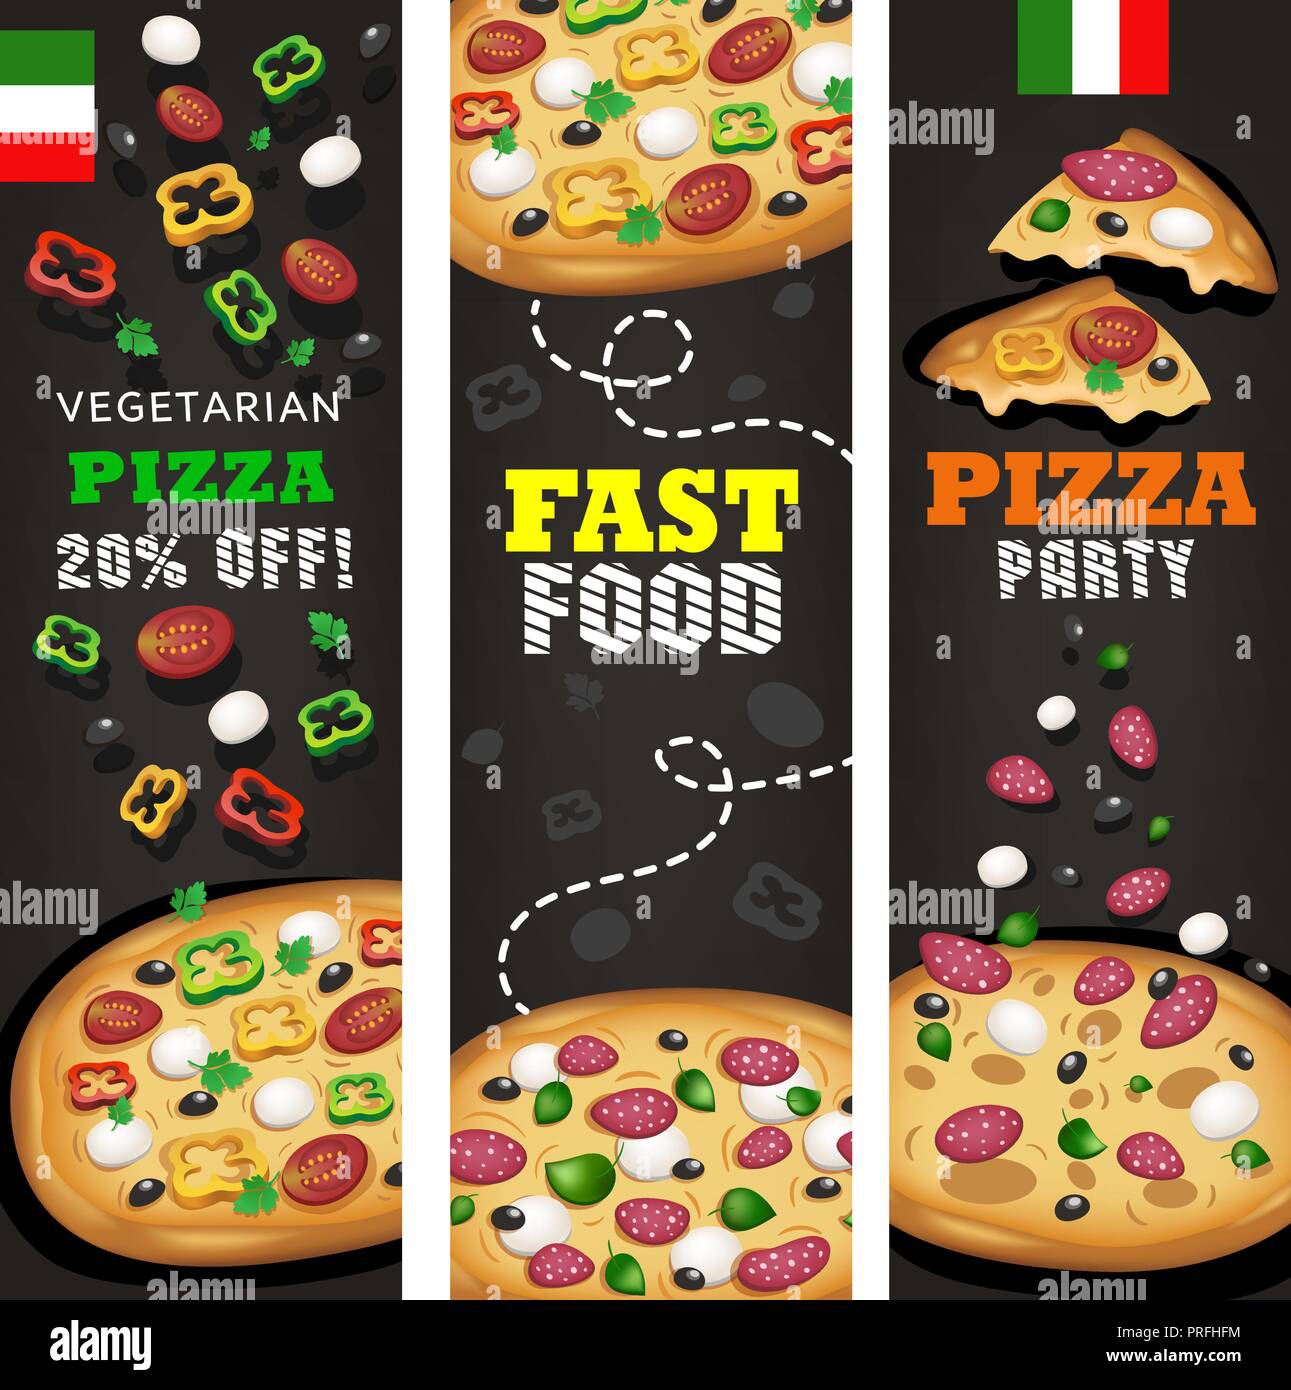 Realistic Pizza Pizzeria Flyer Vector Background Three Vertical Pizza Banners With Ingredients And Text On Modern Black And Dark Gray Background Stock Vector Image Art Alamy